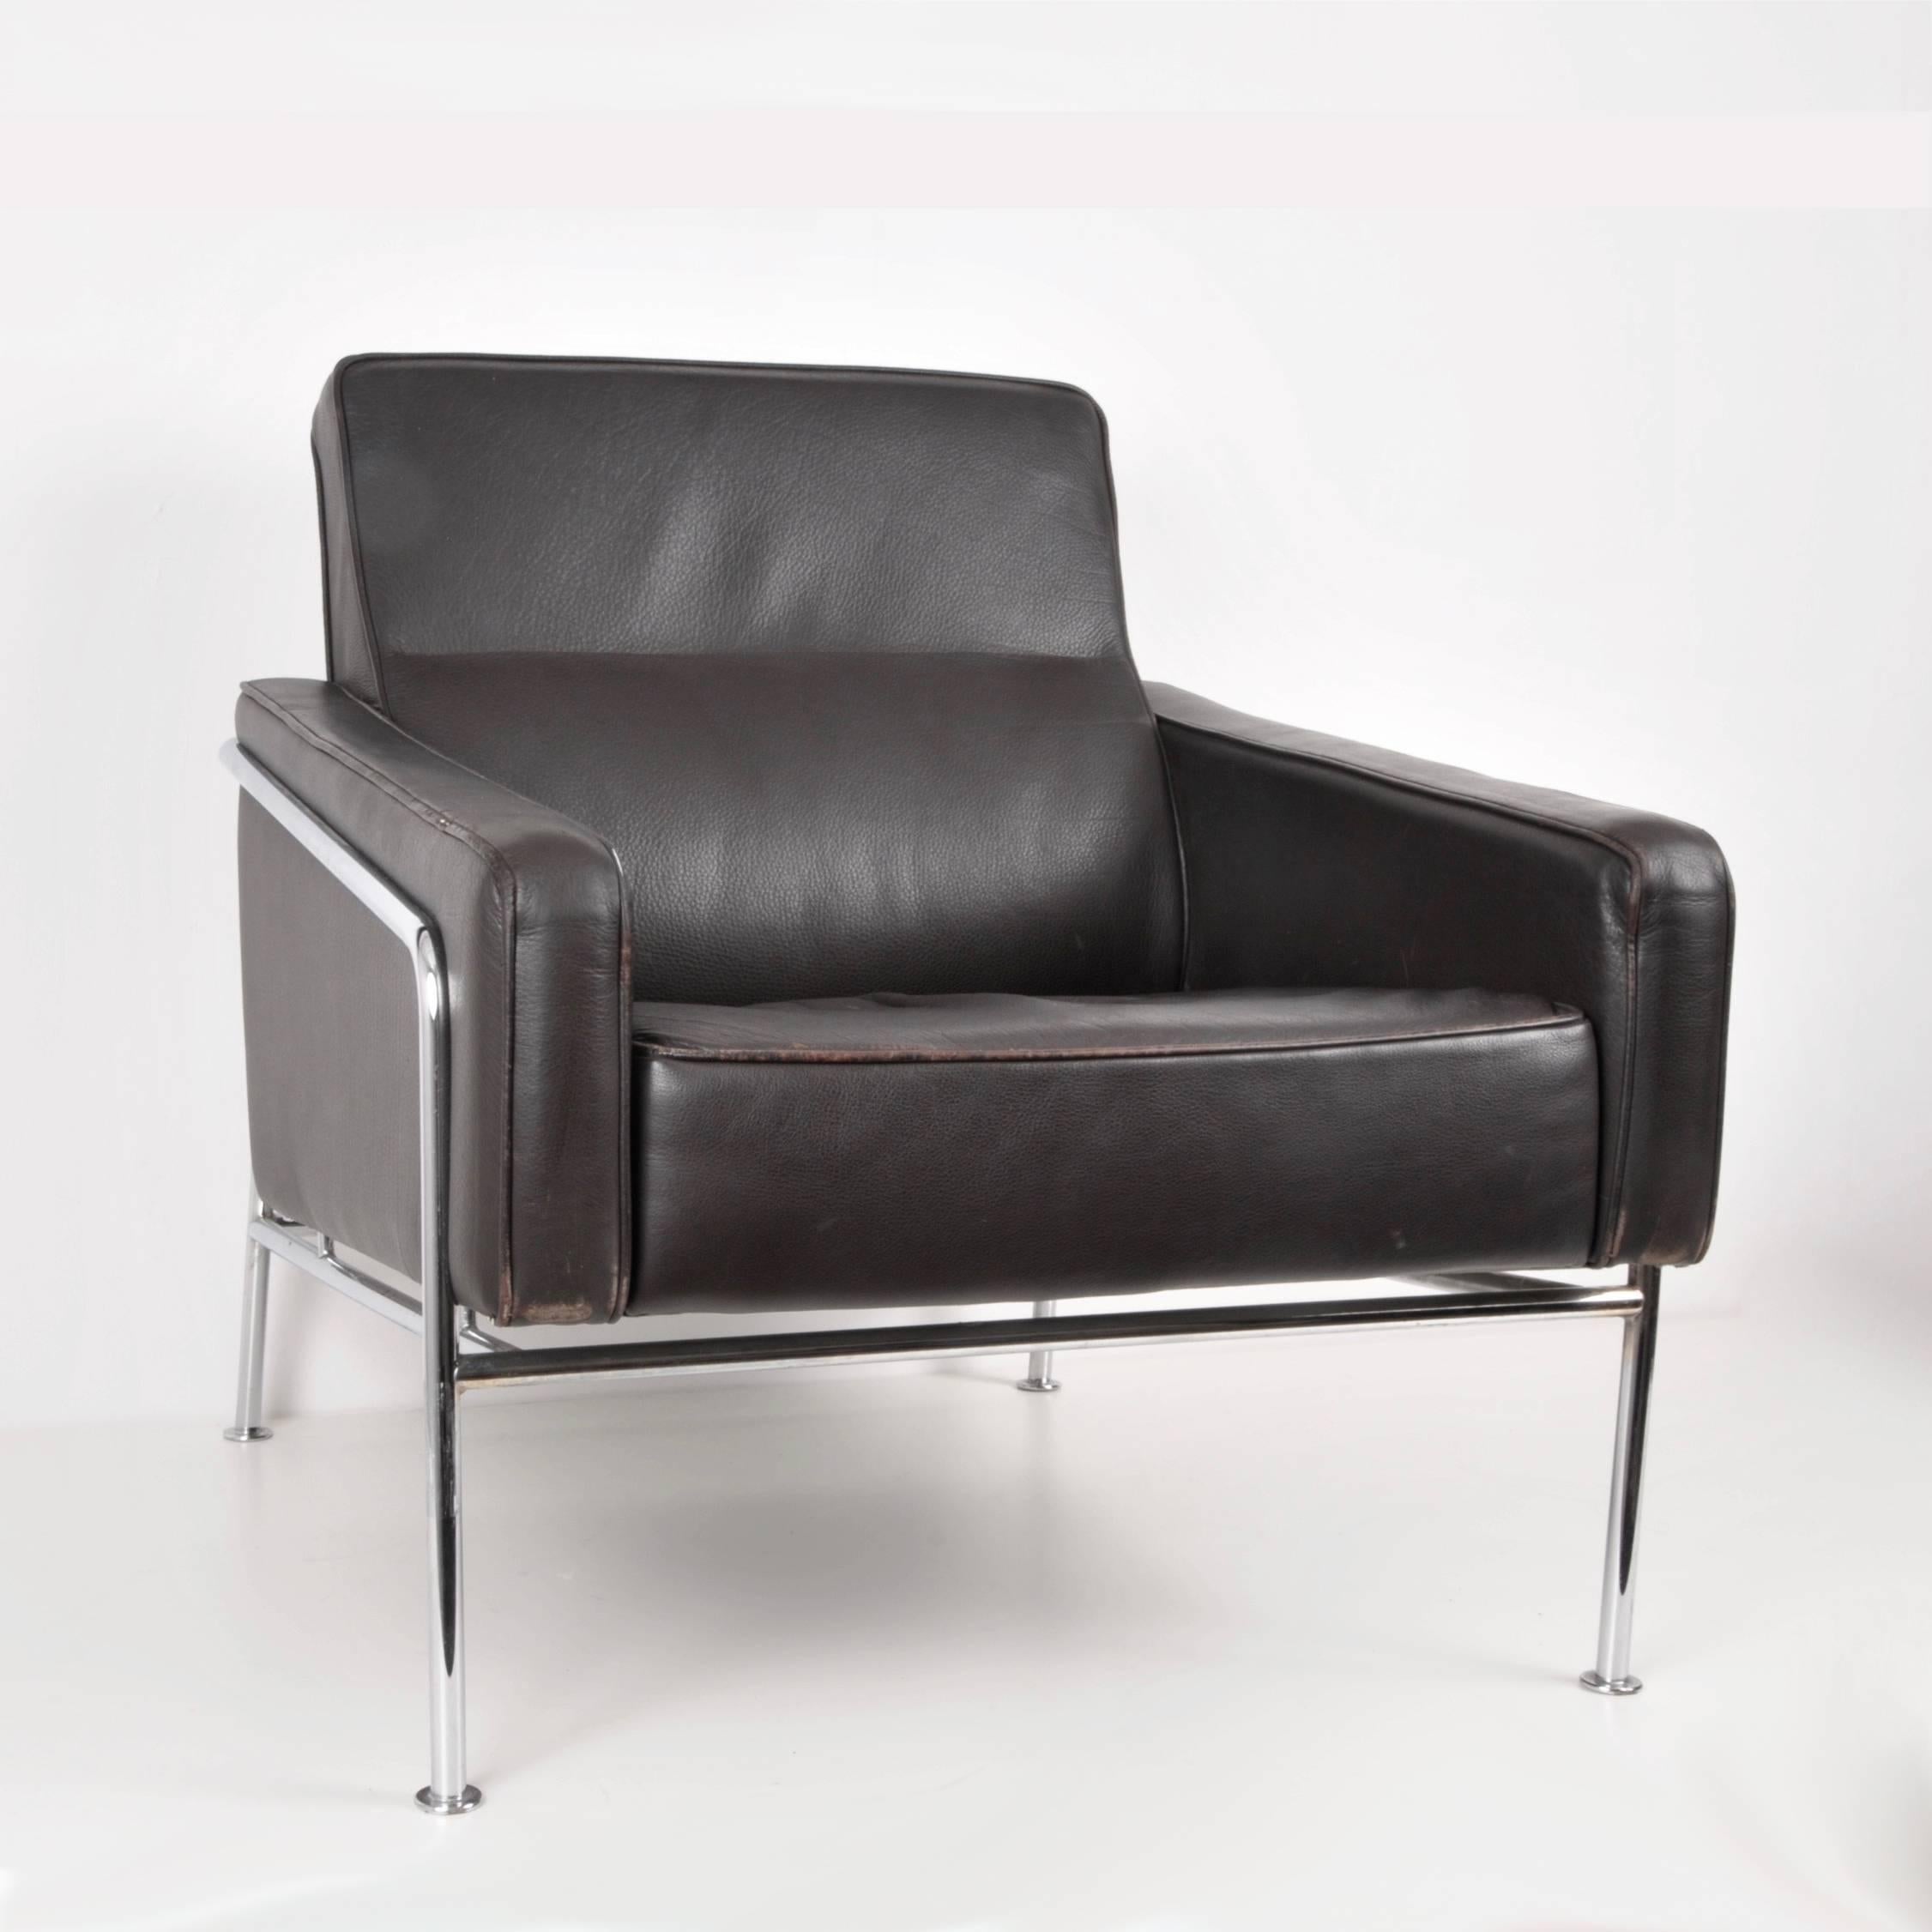 Lounge chair attributed to Arne Jacobsen for Fritz Hansen, 1956 Mid-Century Modern.

As for most of Arne Jacobsen furniture designs were the result of a cooperation with the furniture manufacturer Fritz Hansen with which he initiated a